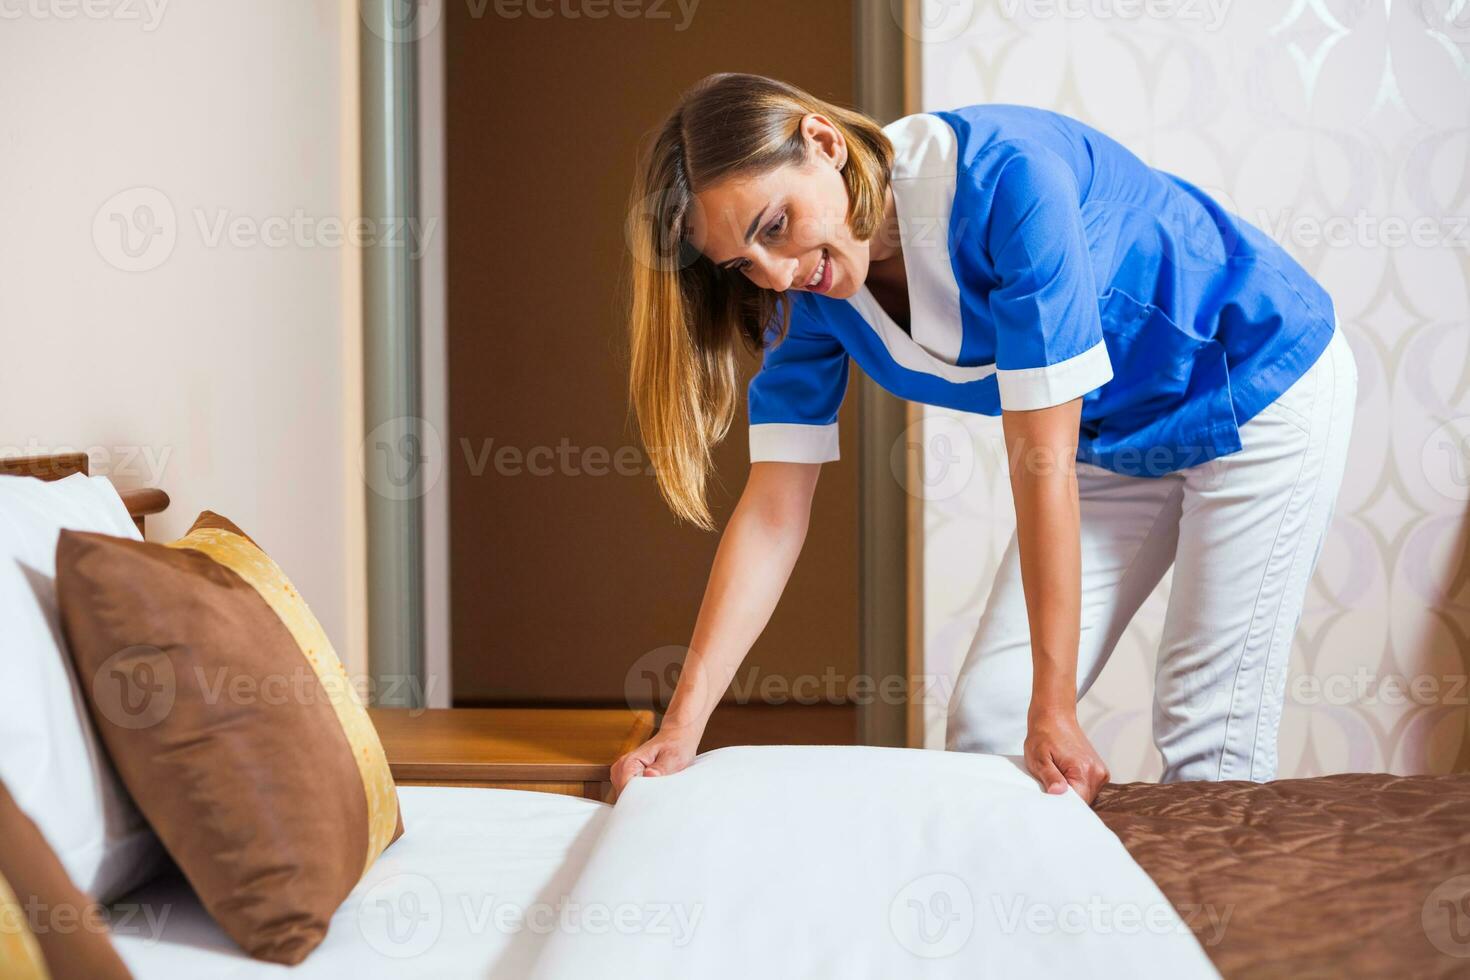 A maid working in a hotel room photo